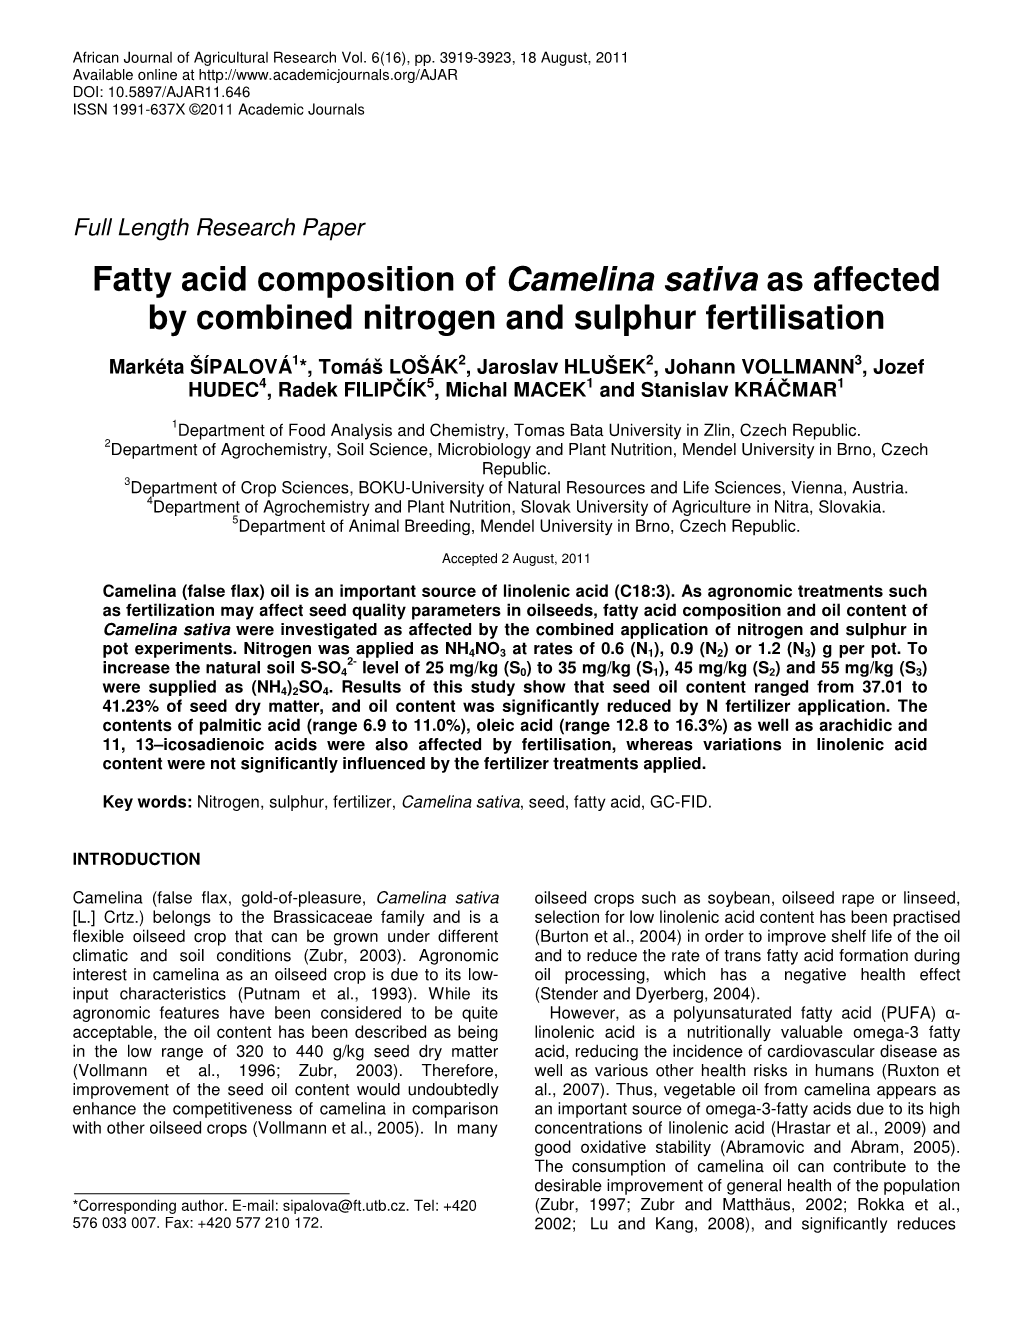 Fatty Acid Composition of Camelina Sativa As Affected by Combined Nitrogen and Sulphur Fertilisation